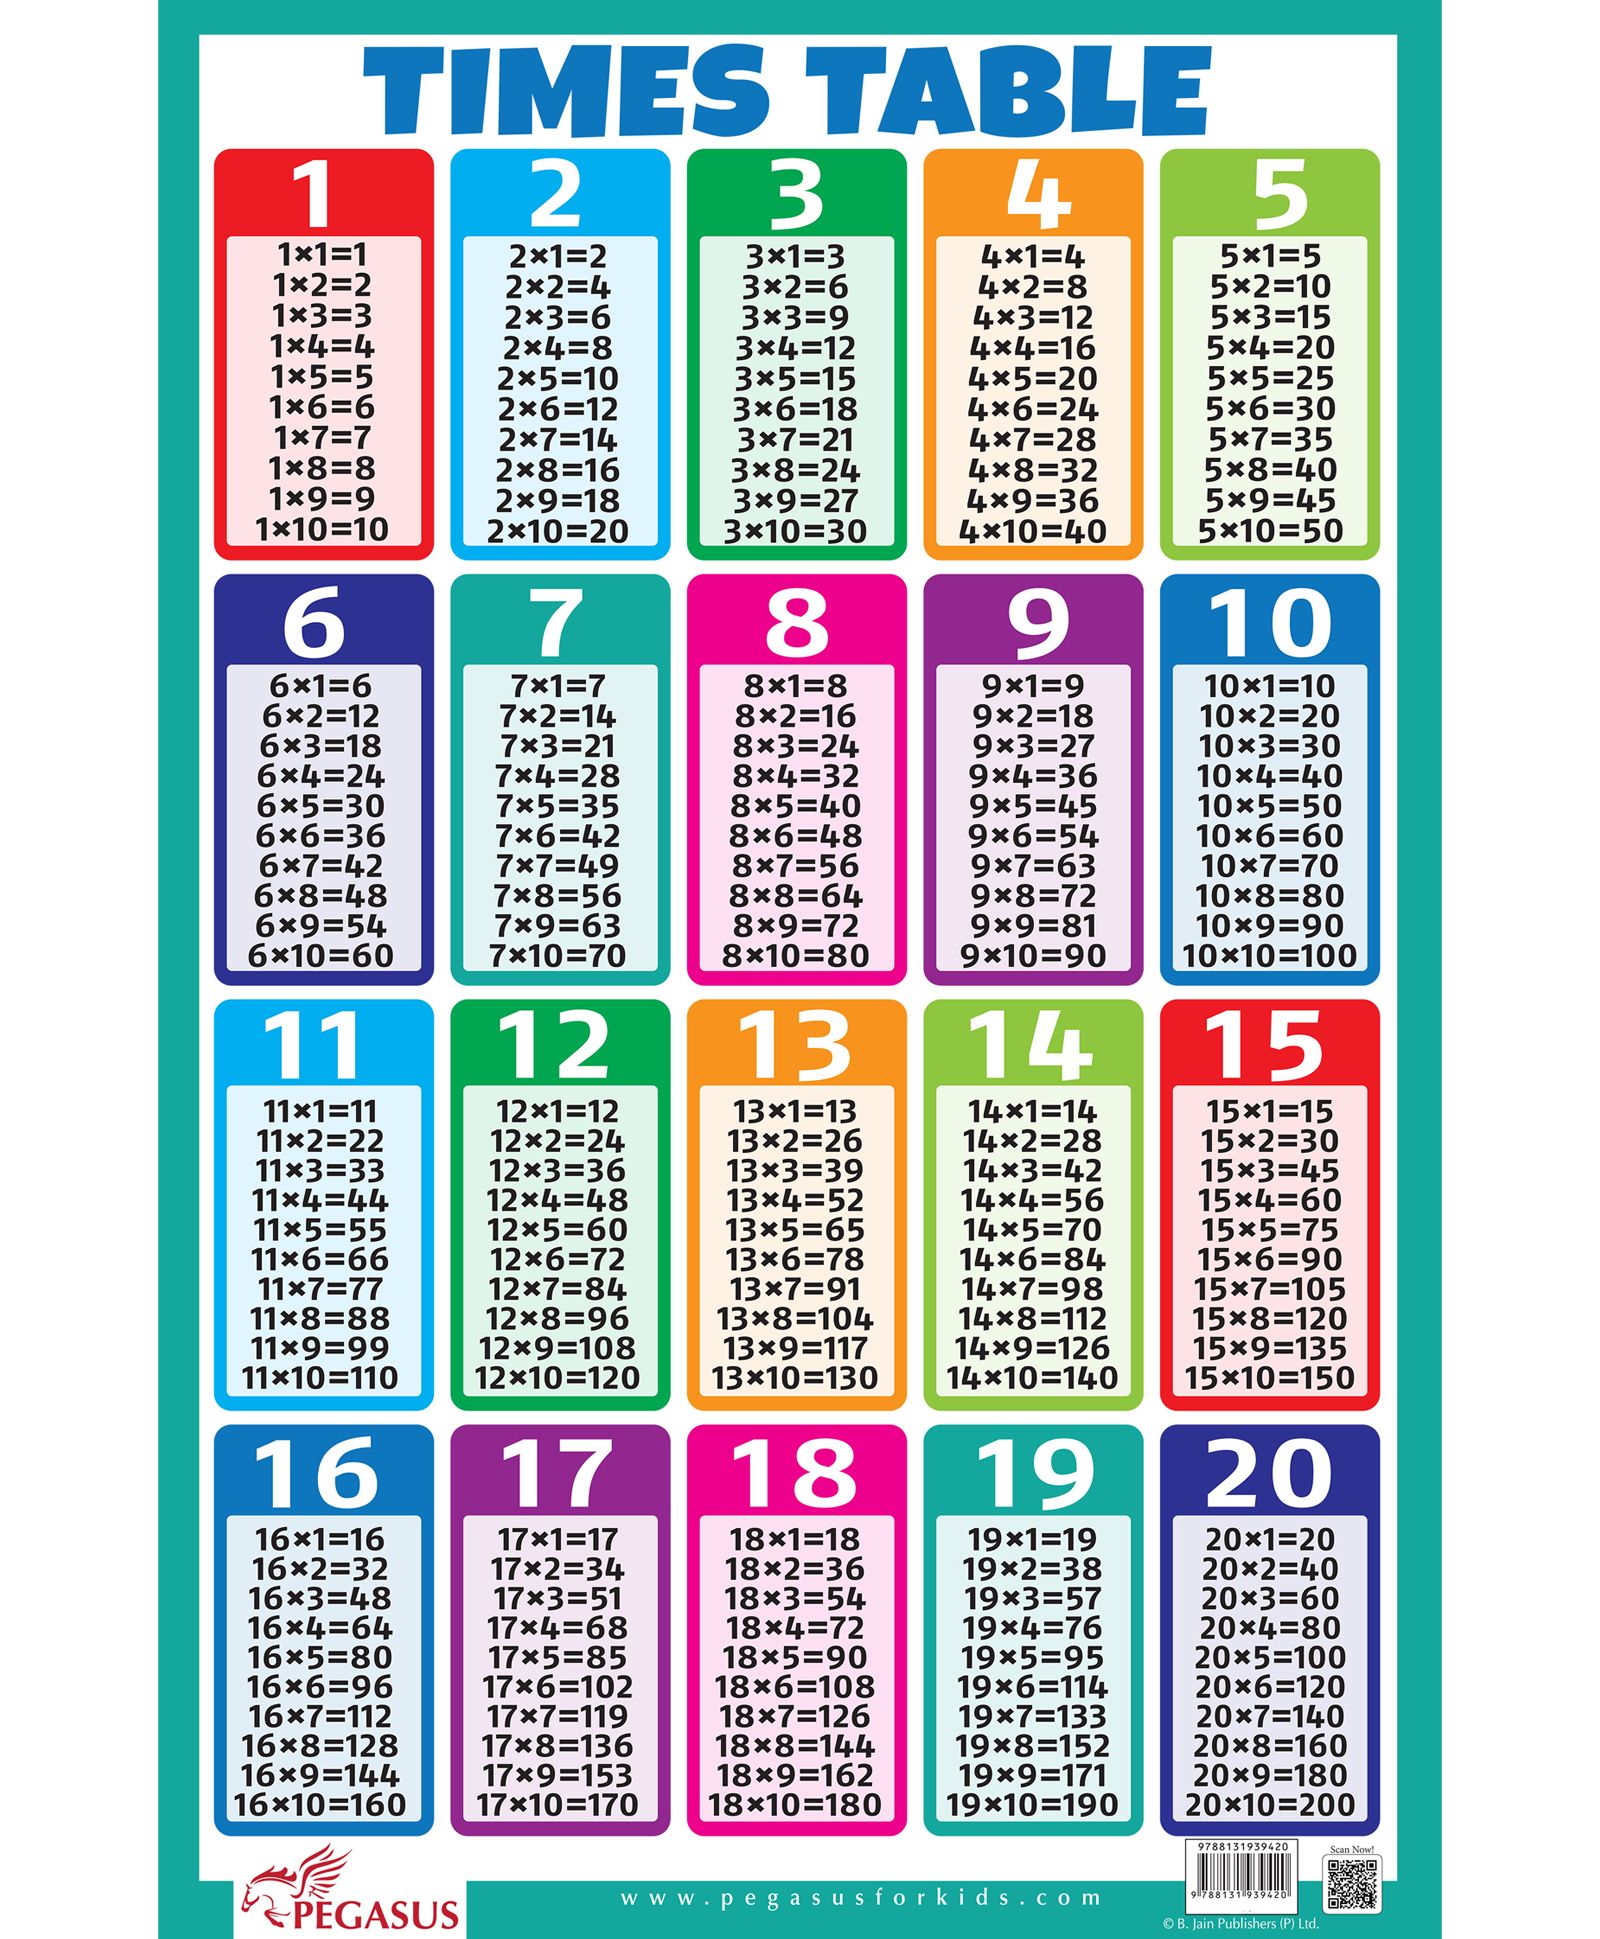 multiplication chart 1 to 20